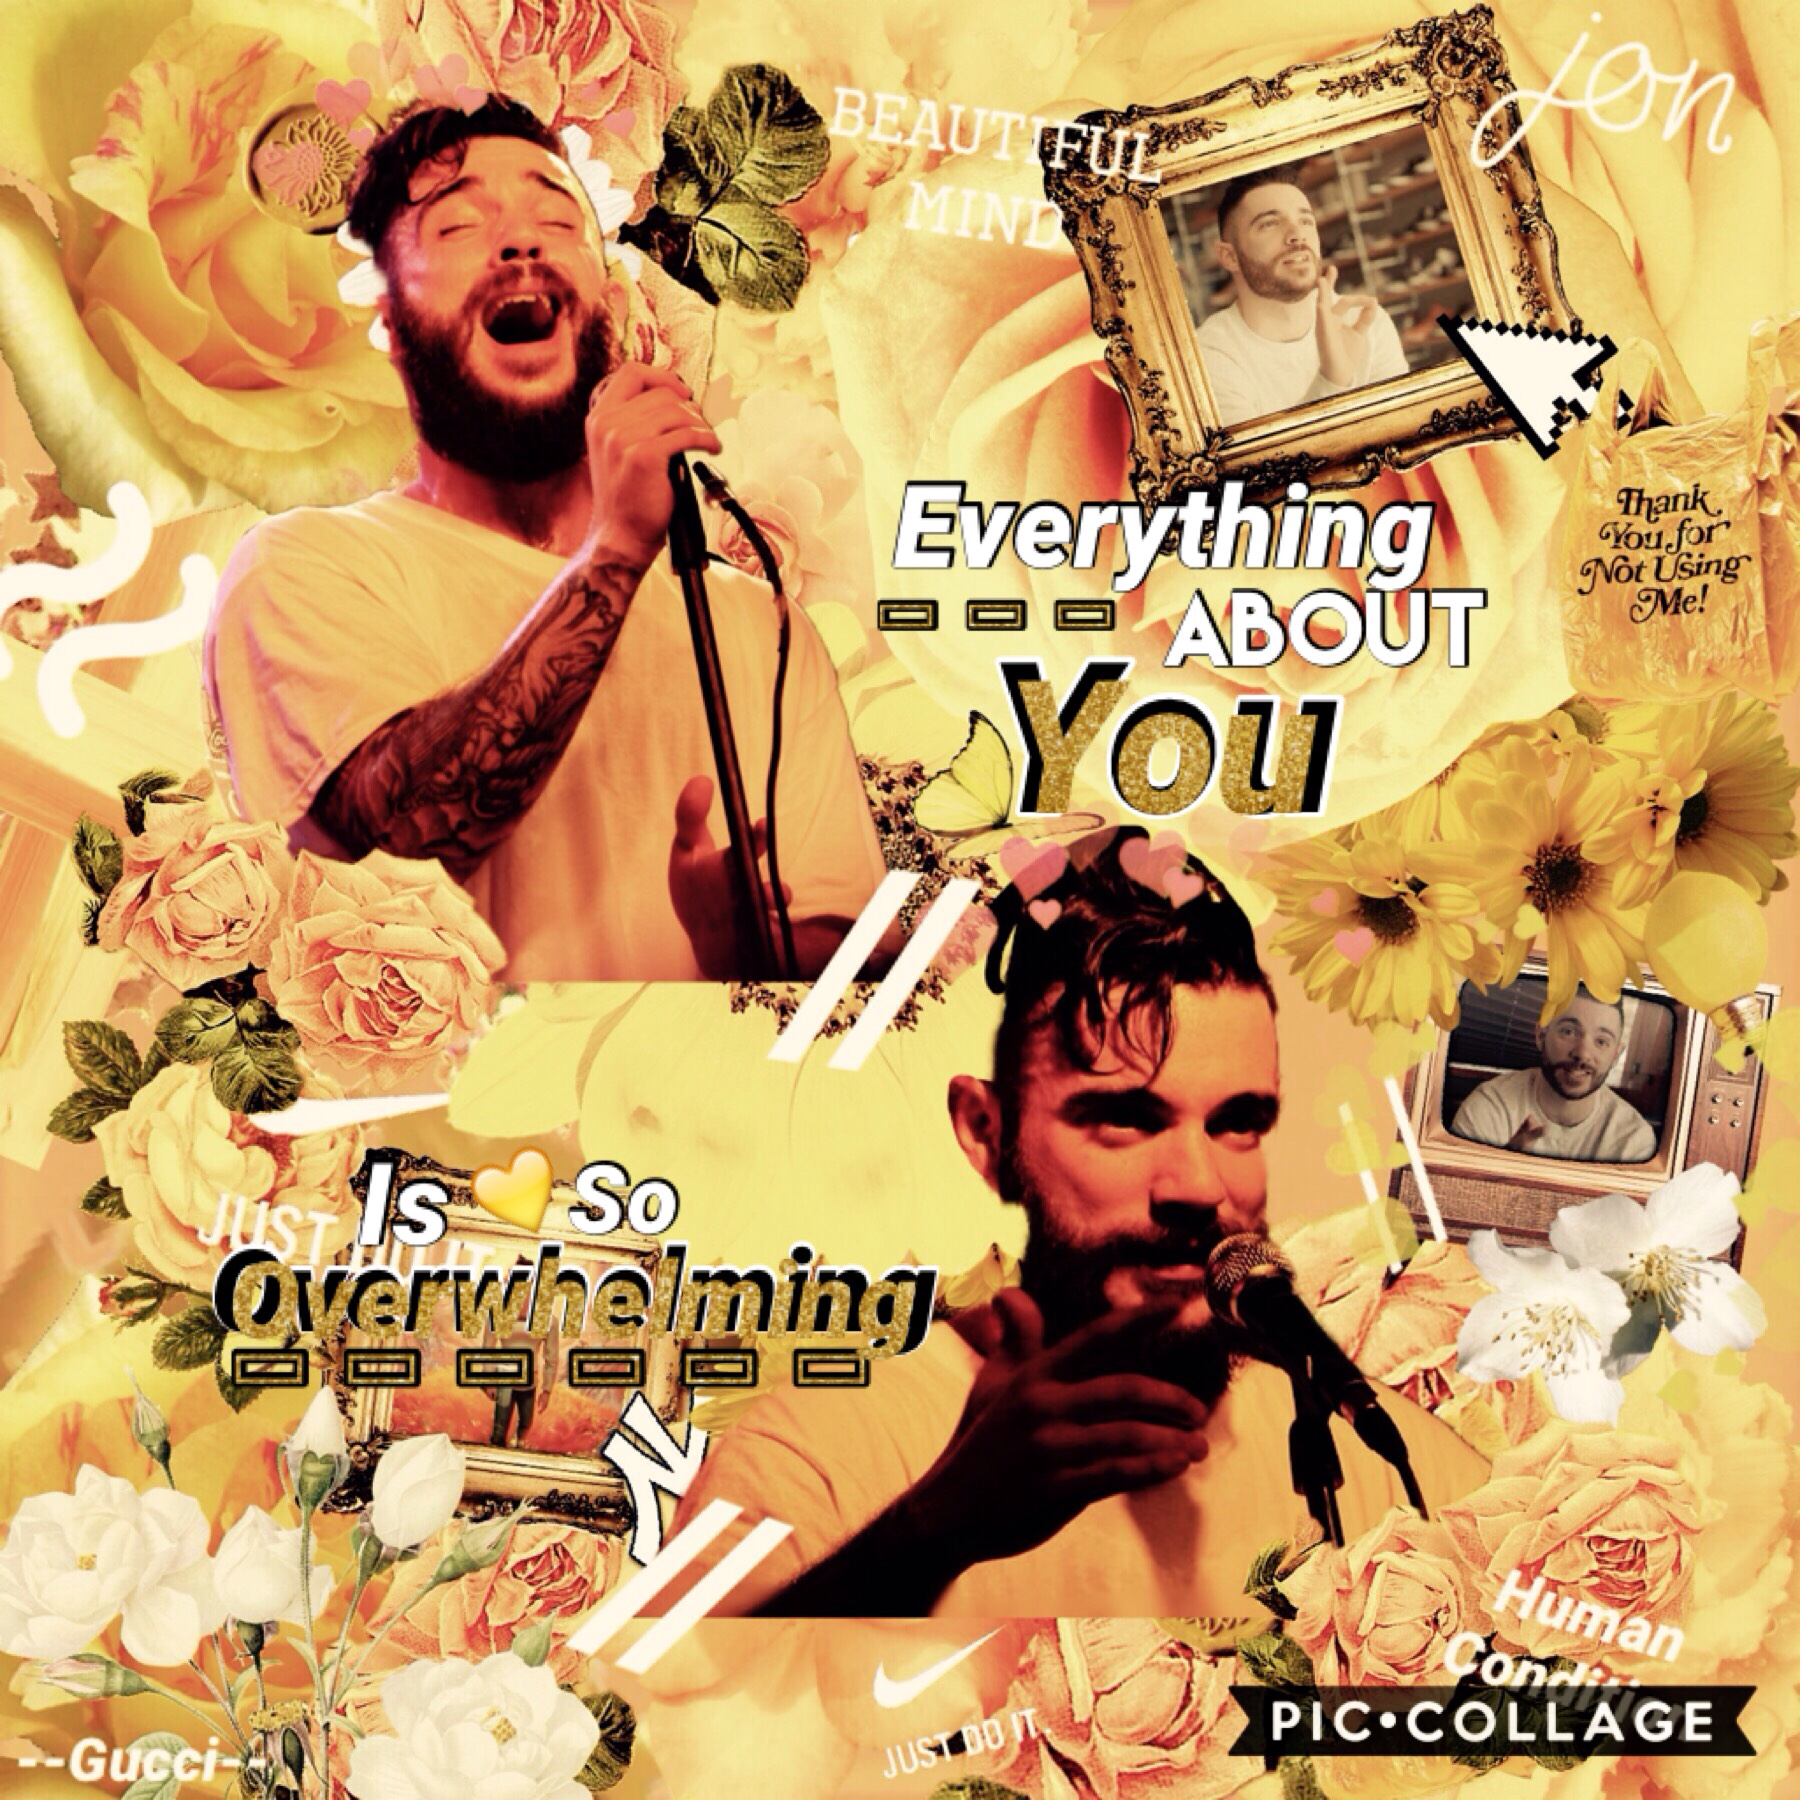 Tap
Randomly found this while looking through my edits. I remember taking hours to do this with only PC. I absolutely love Jon Bellion and I wonder why I never posted this.
{Have a great day y'all}